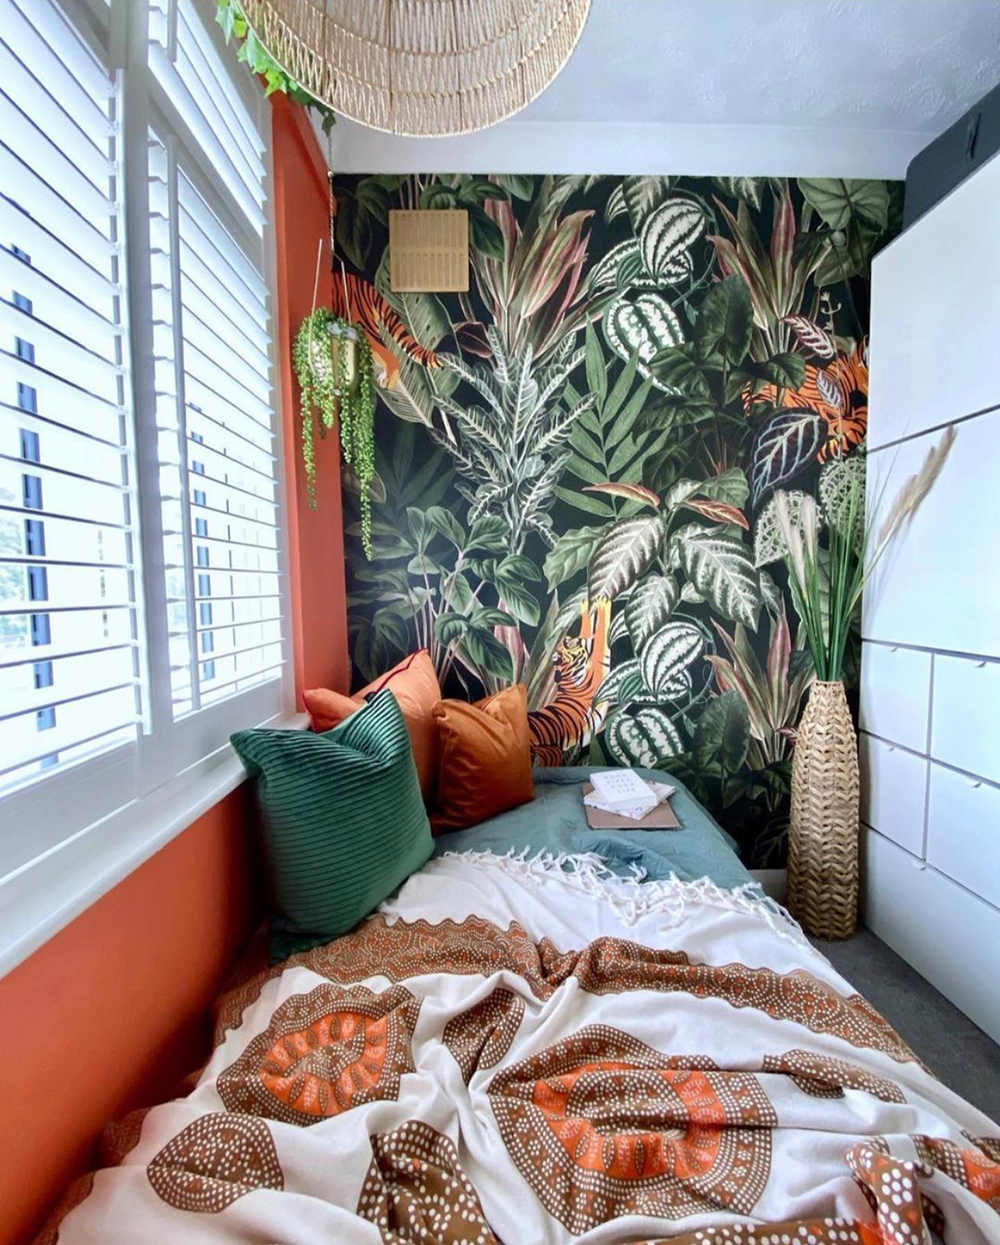 Small bedroom decor ideas with bold, tropical patterned wallpaper